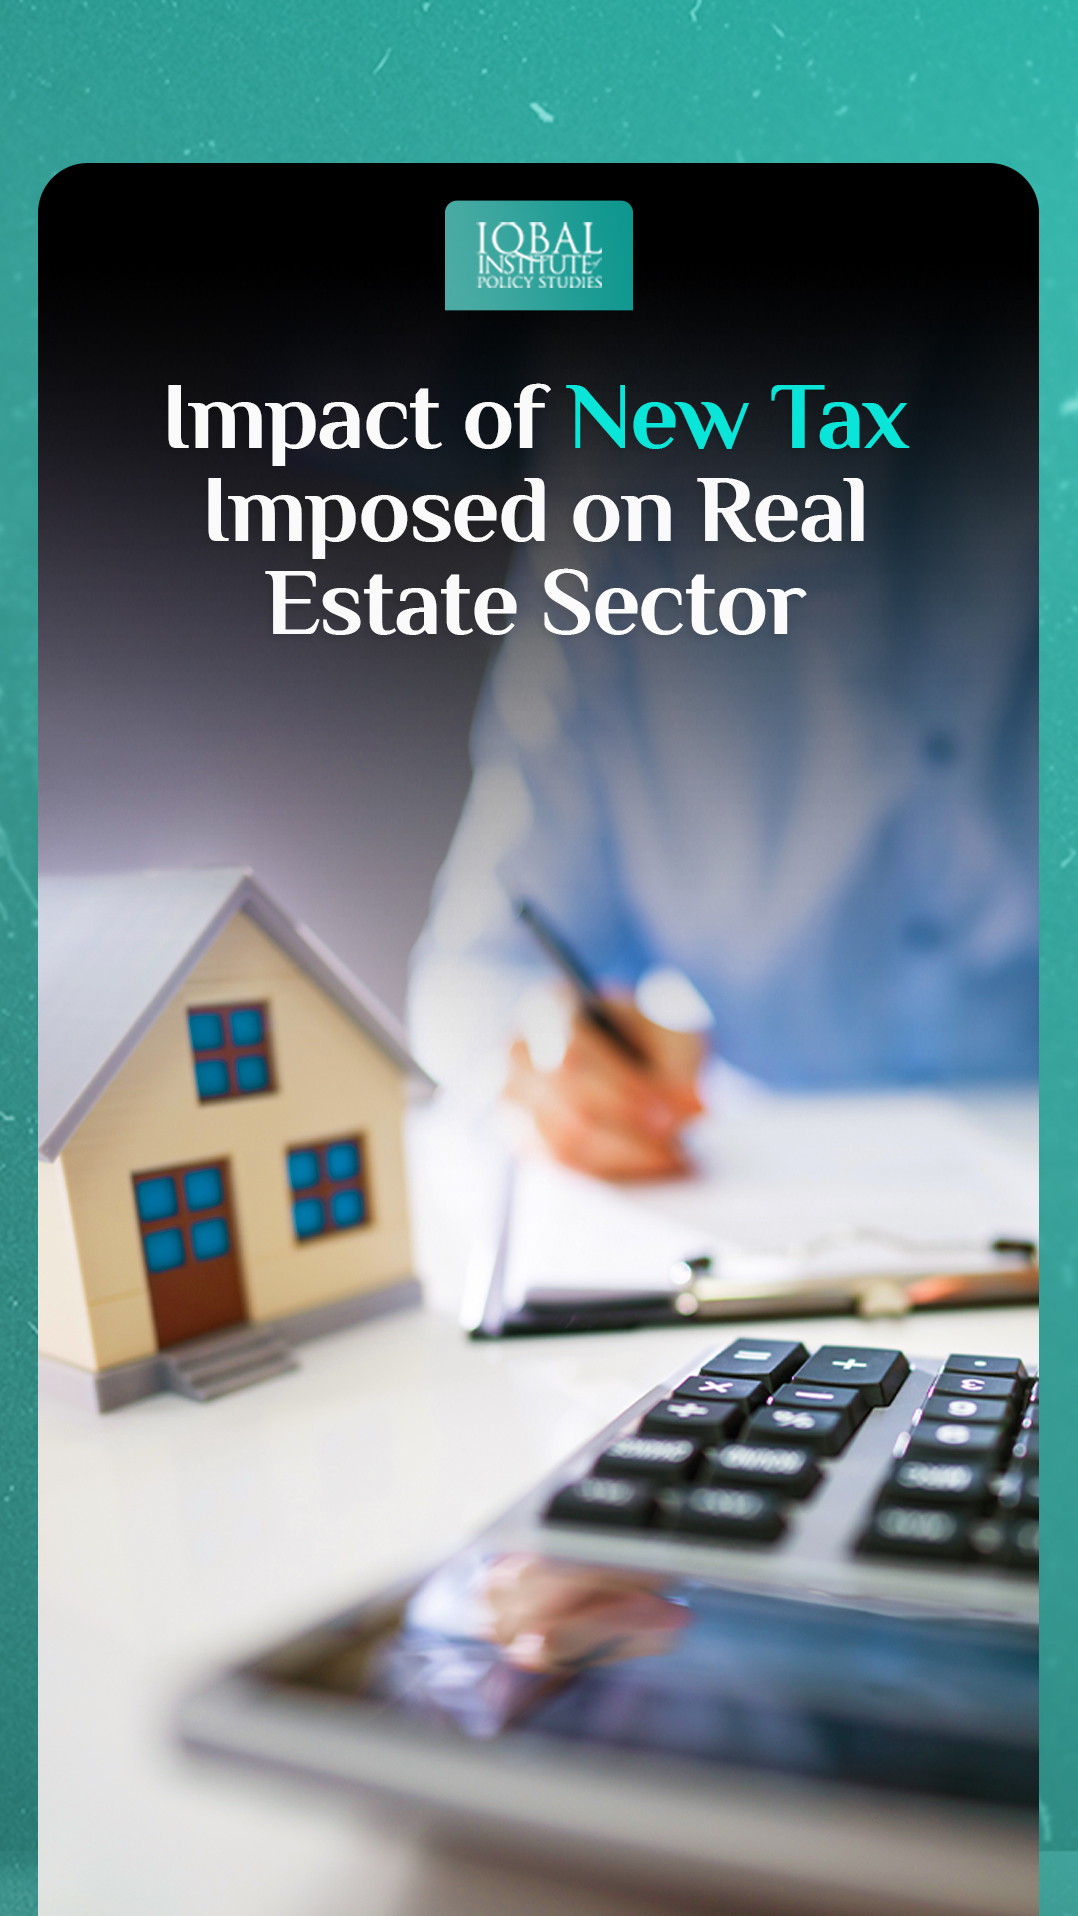 Impact of New Tax imposed on Real Estate Sector